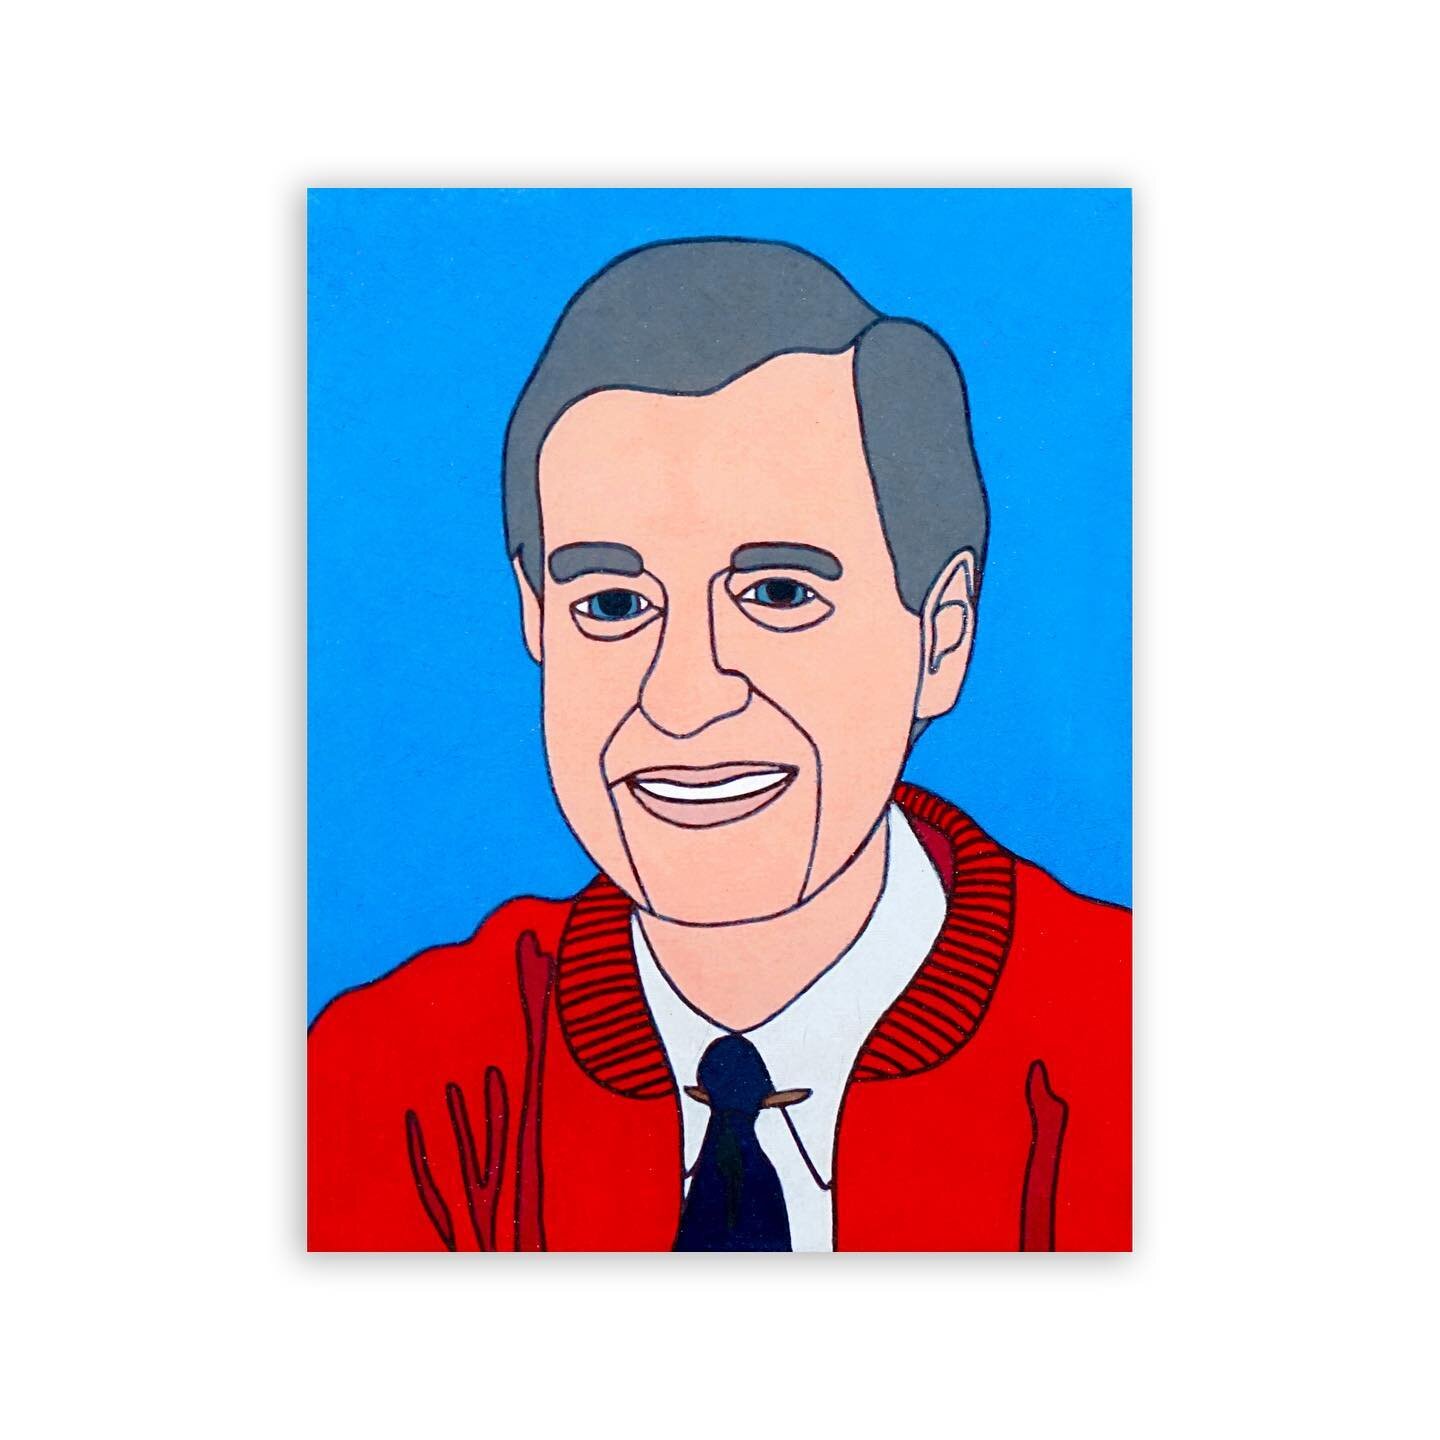 Before I settled on the idea of musicians for my Icons piece, I drew lots of other icons, including Mr. Rogers here.